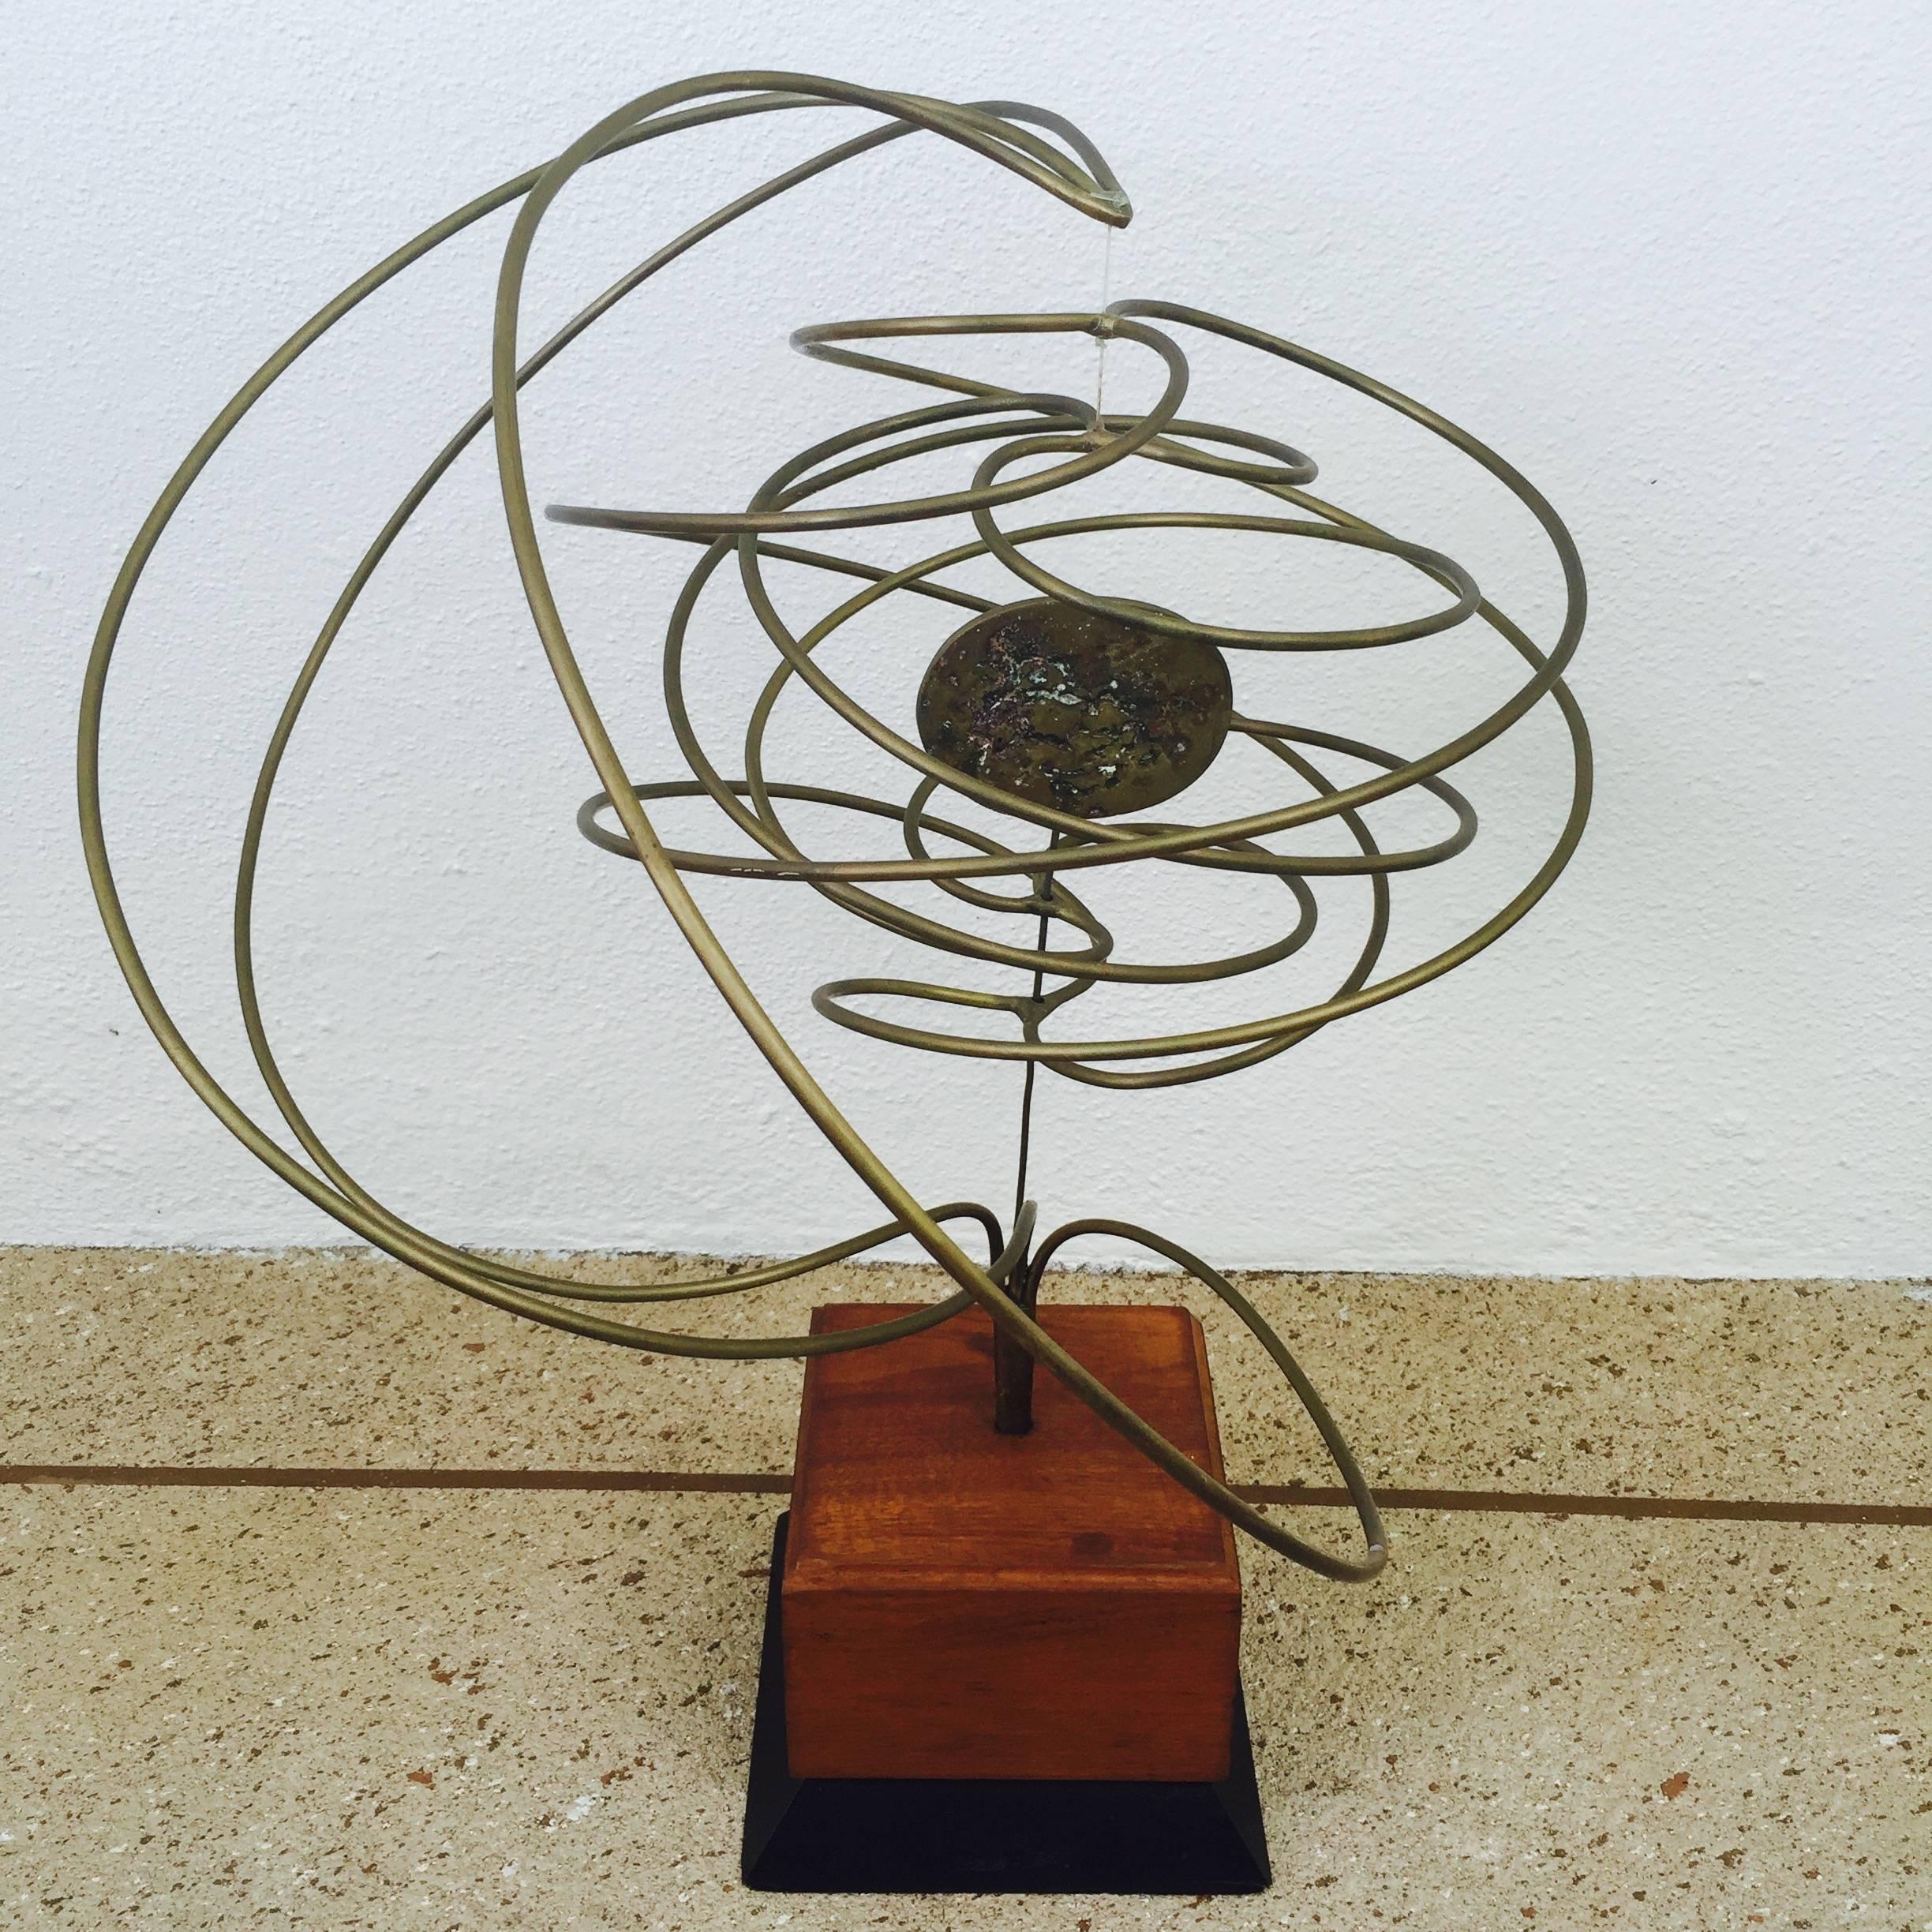 A kinetic sculpture of brass signed and dated by Michael Cutler.
Early works by Cutler were done in brass which makes this rare.
He later worked mostly in steel.
Fantastic Brutalist in style "pendulum" which is very of the